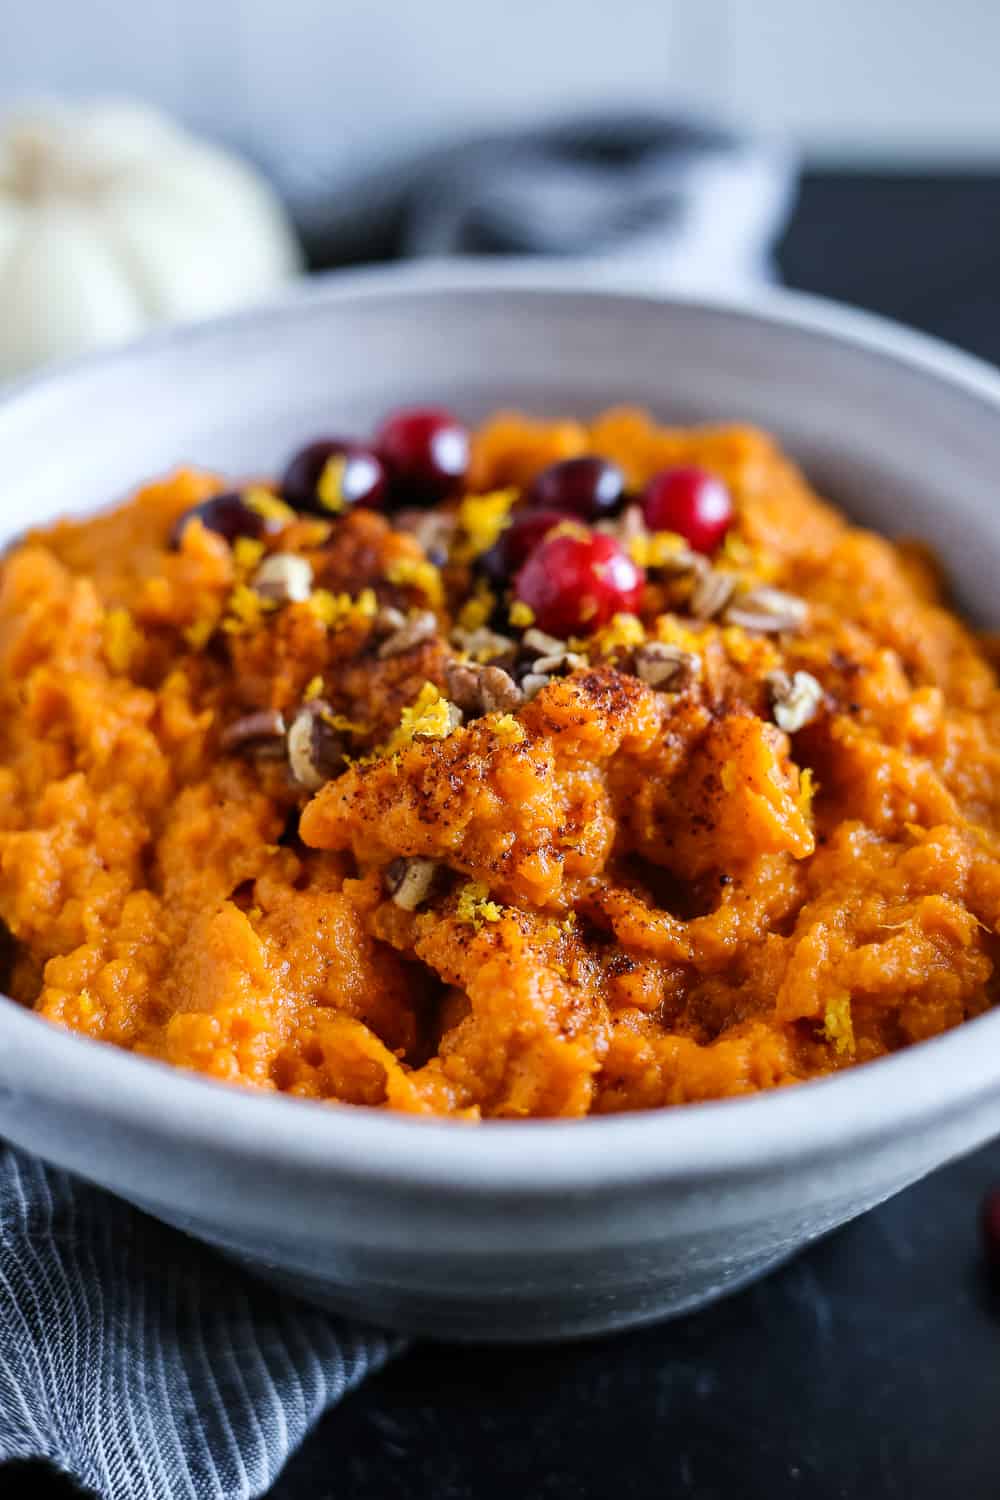 Mashed sweet potatoes in a blue ceramic serving bowl, garnished with chopped pecans, orange zest, and fresh cranberries